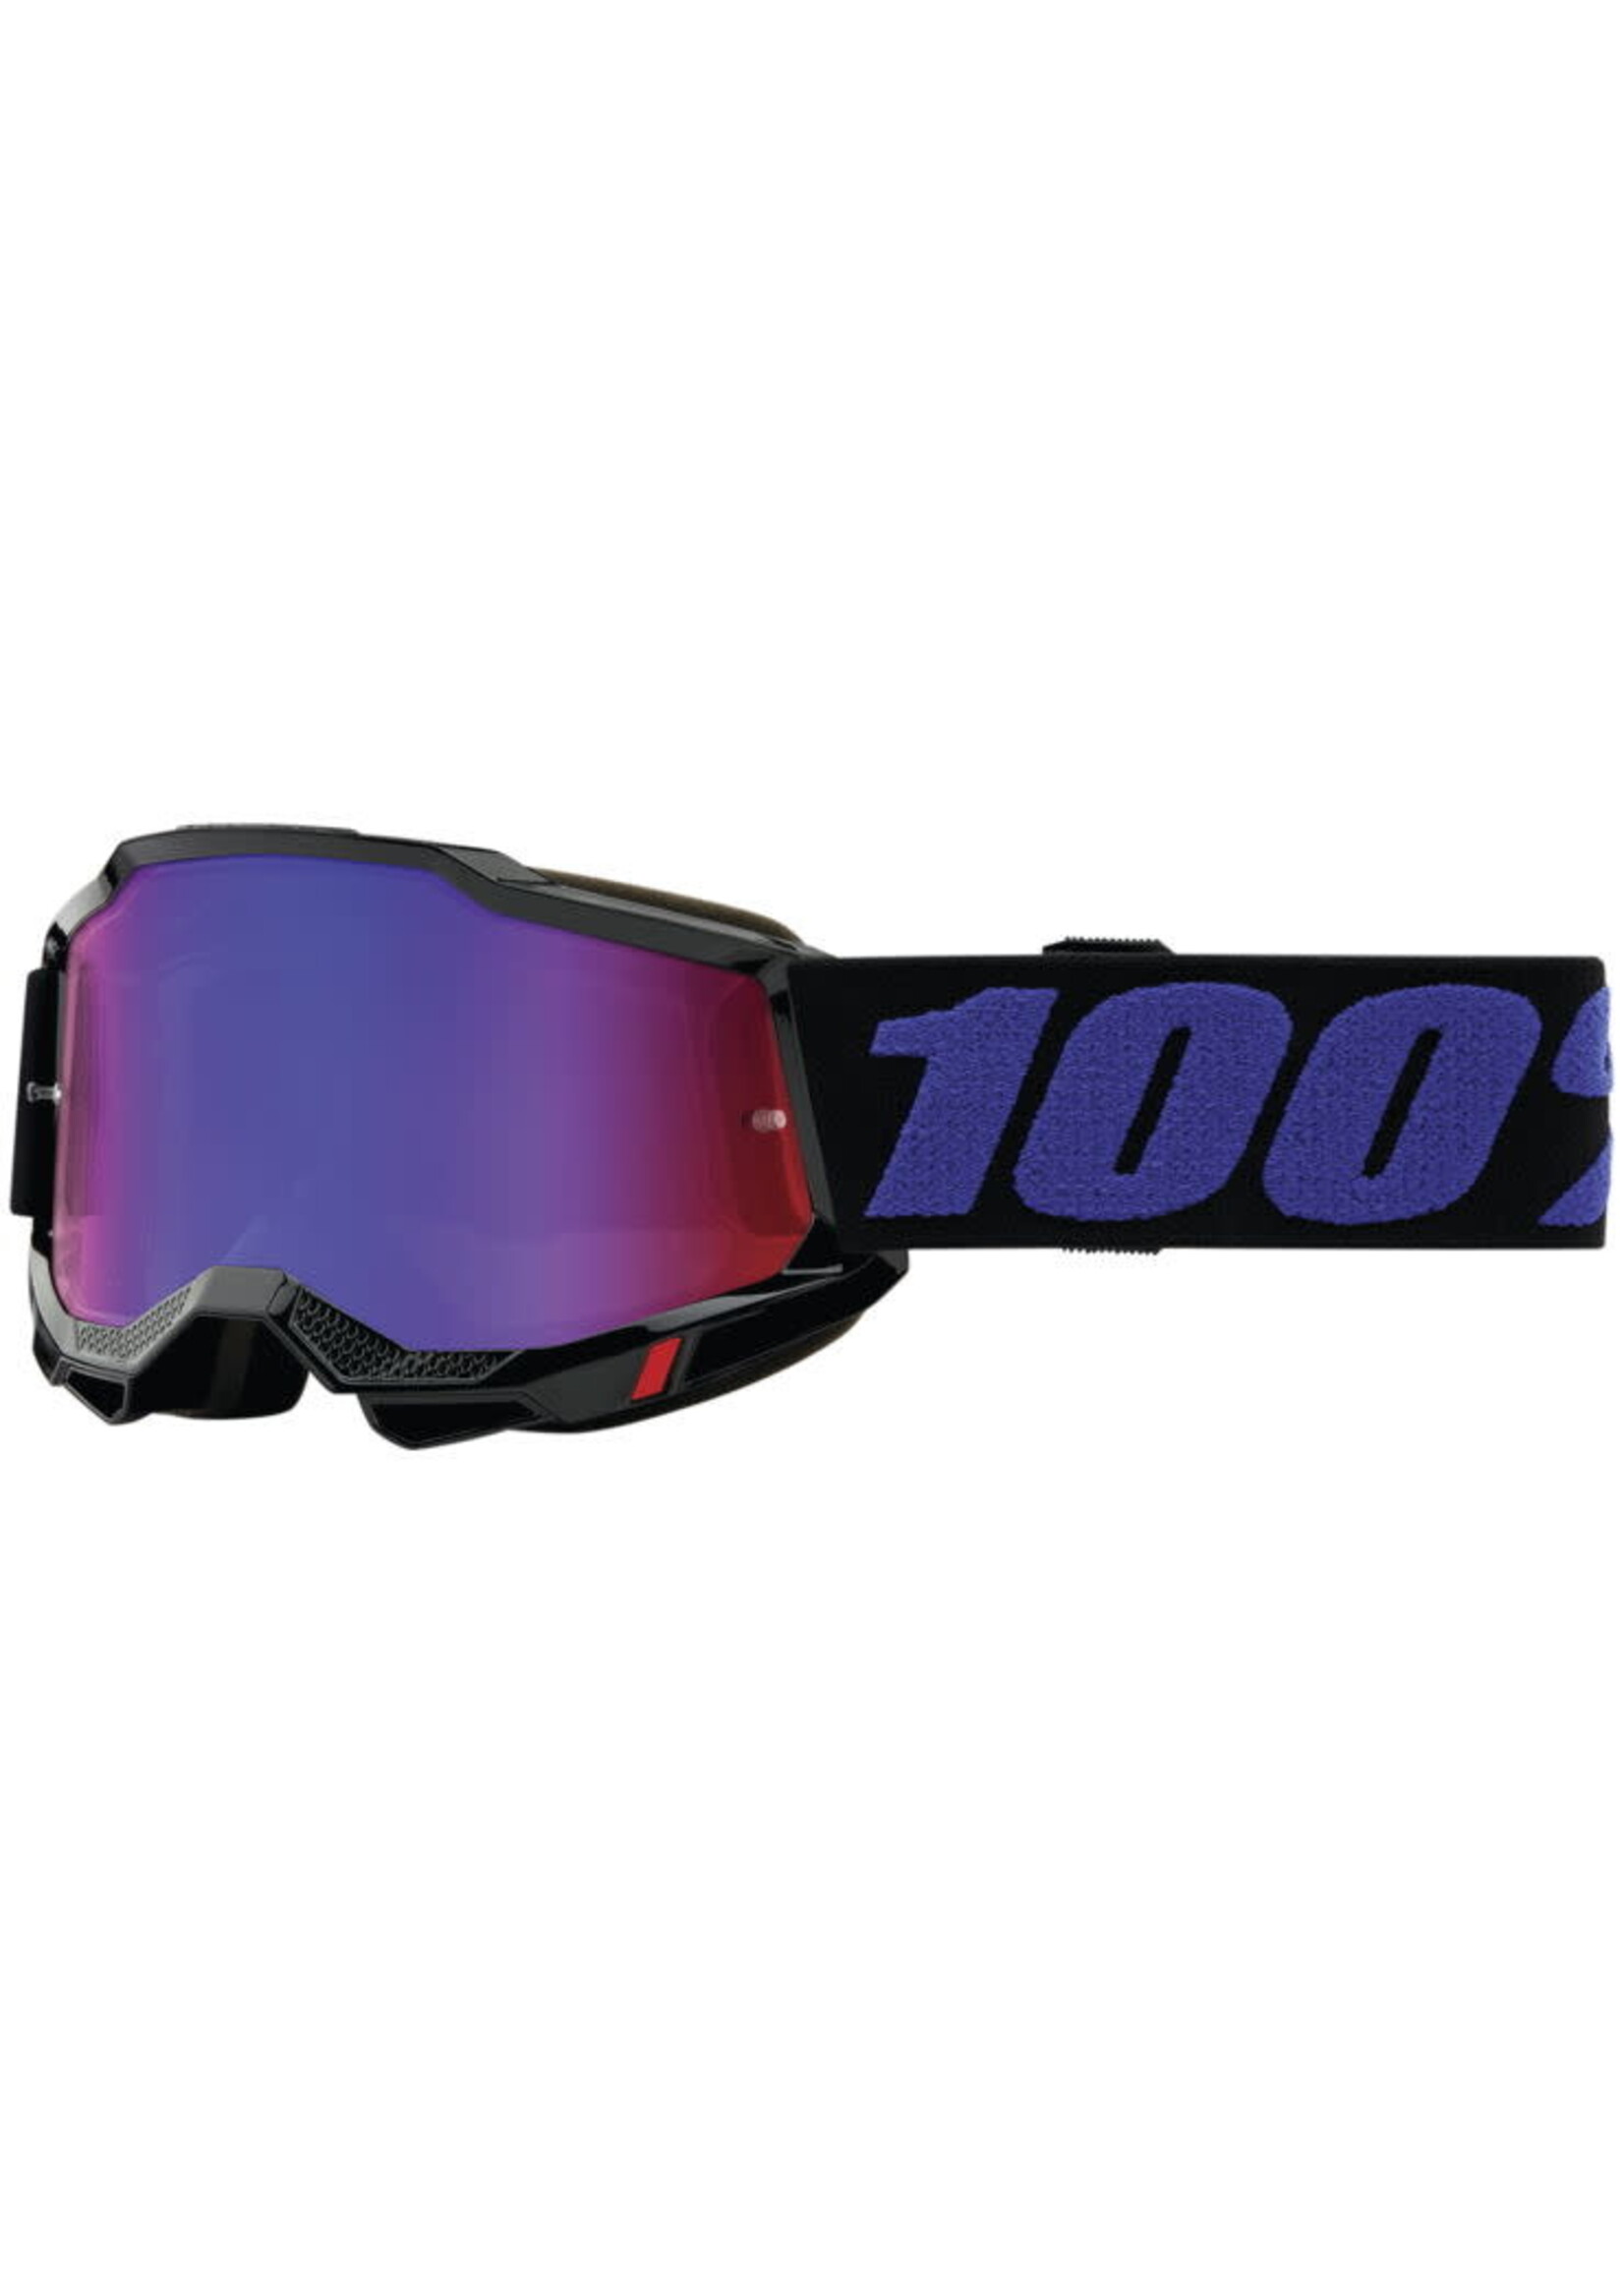 100% 100% Accuri Jr. 2 Goggle Moore with Red/Blue Mirror Lens